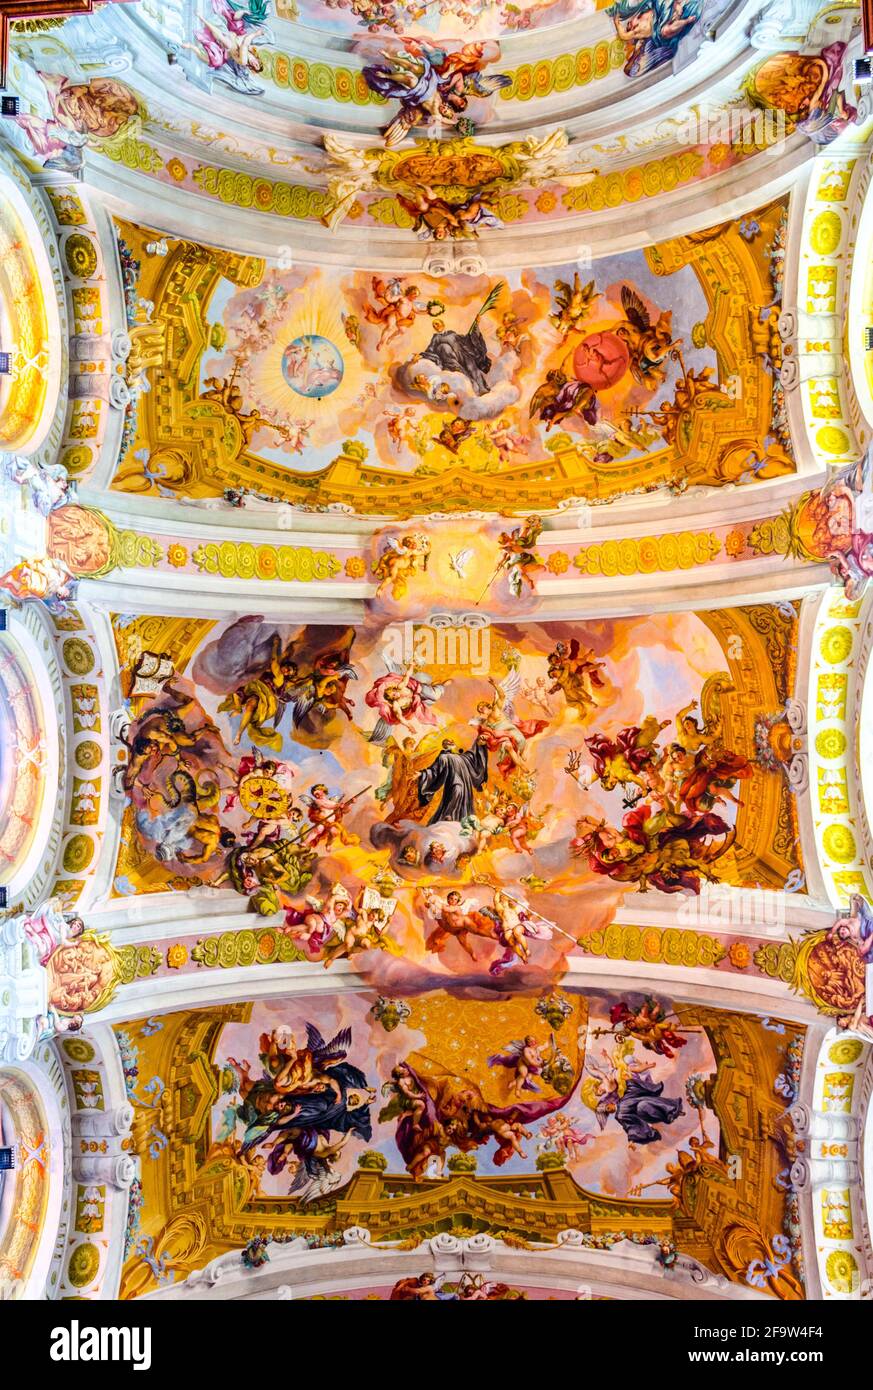 MELK, AUSTRIA, MAY 16, 2015: ceiling painting in Melk Abbey in Melk, Austria. Abbey Church is considered one of the most beautiful in Austria, built i Stock Photo